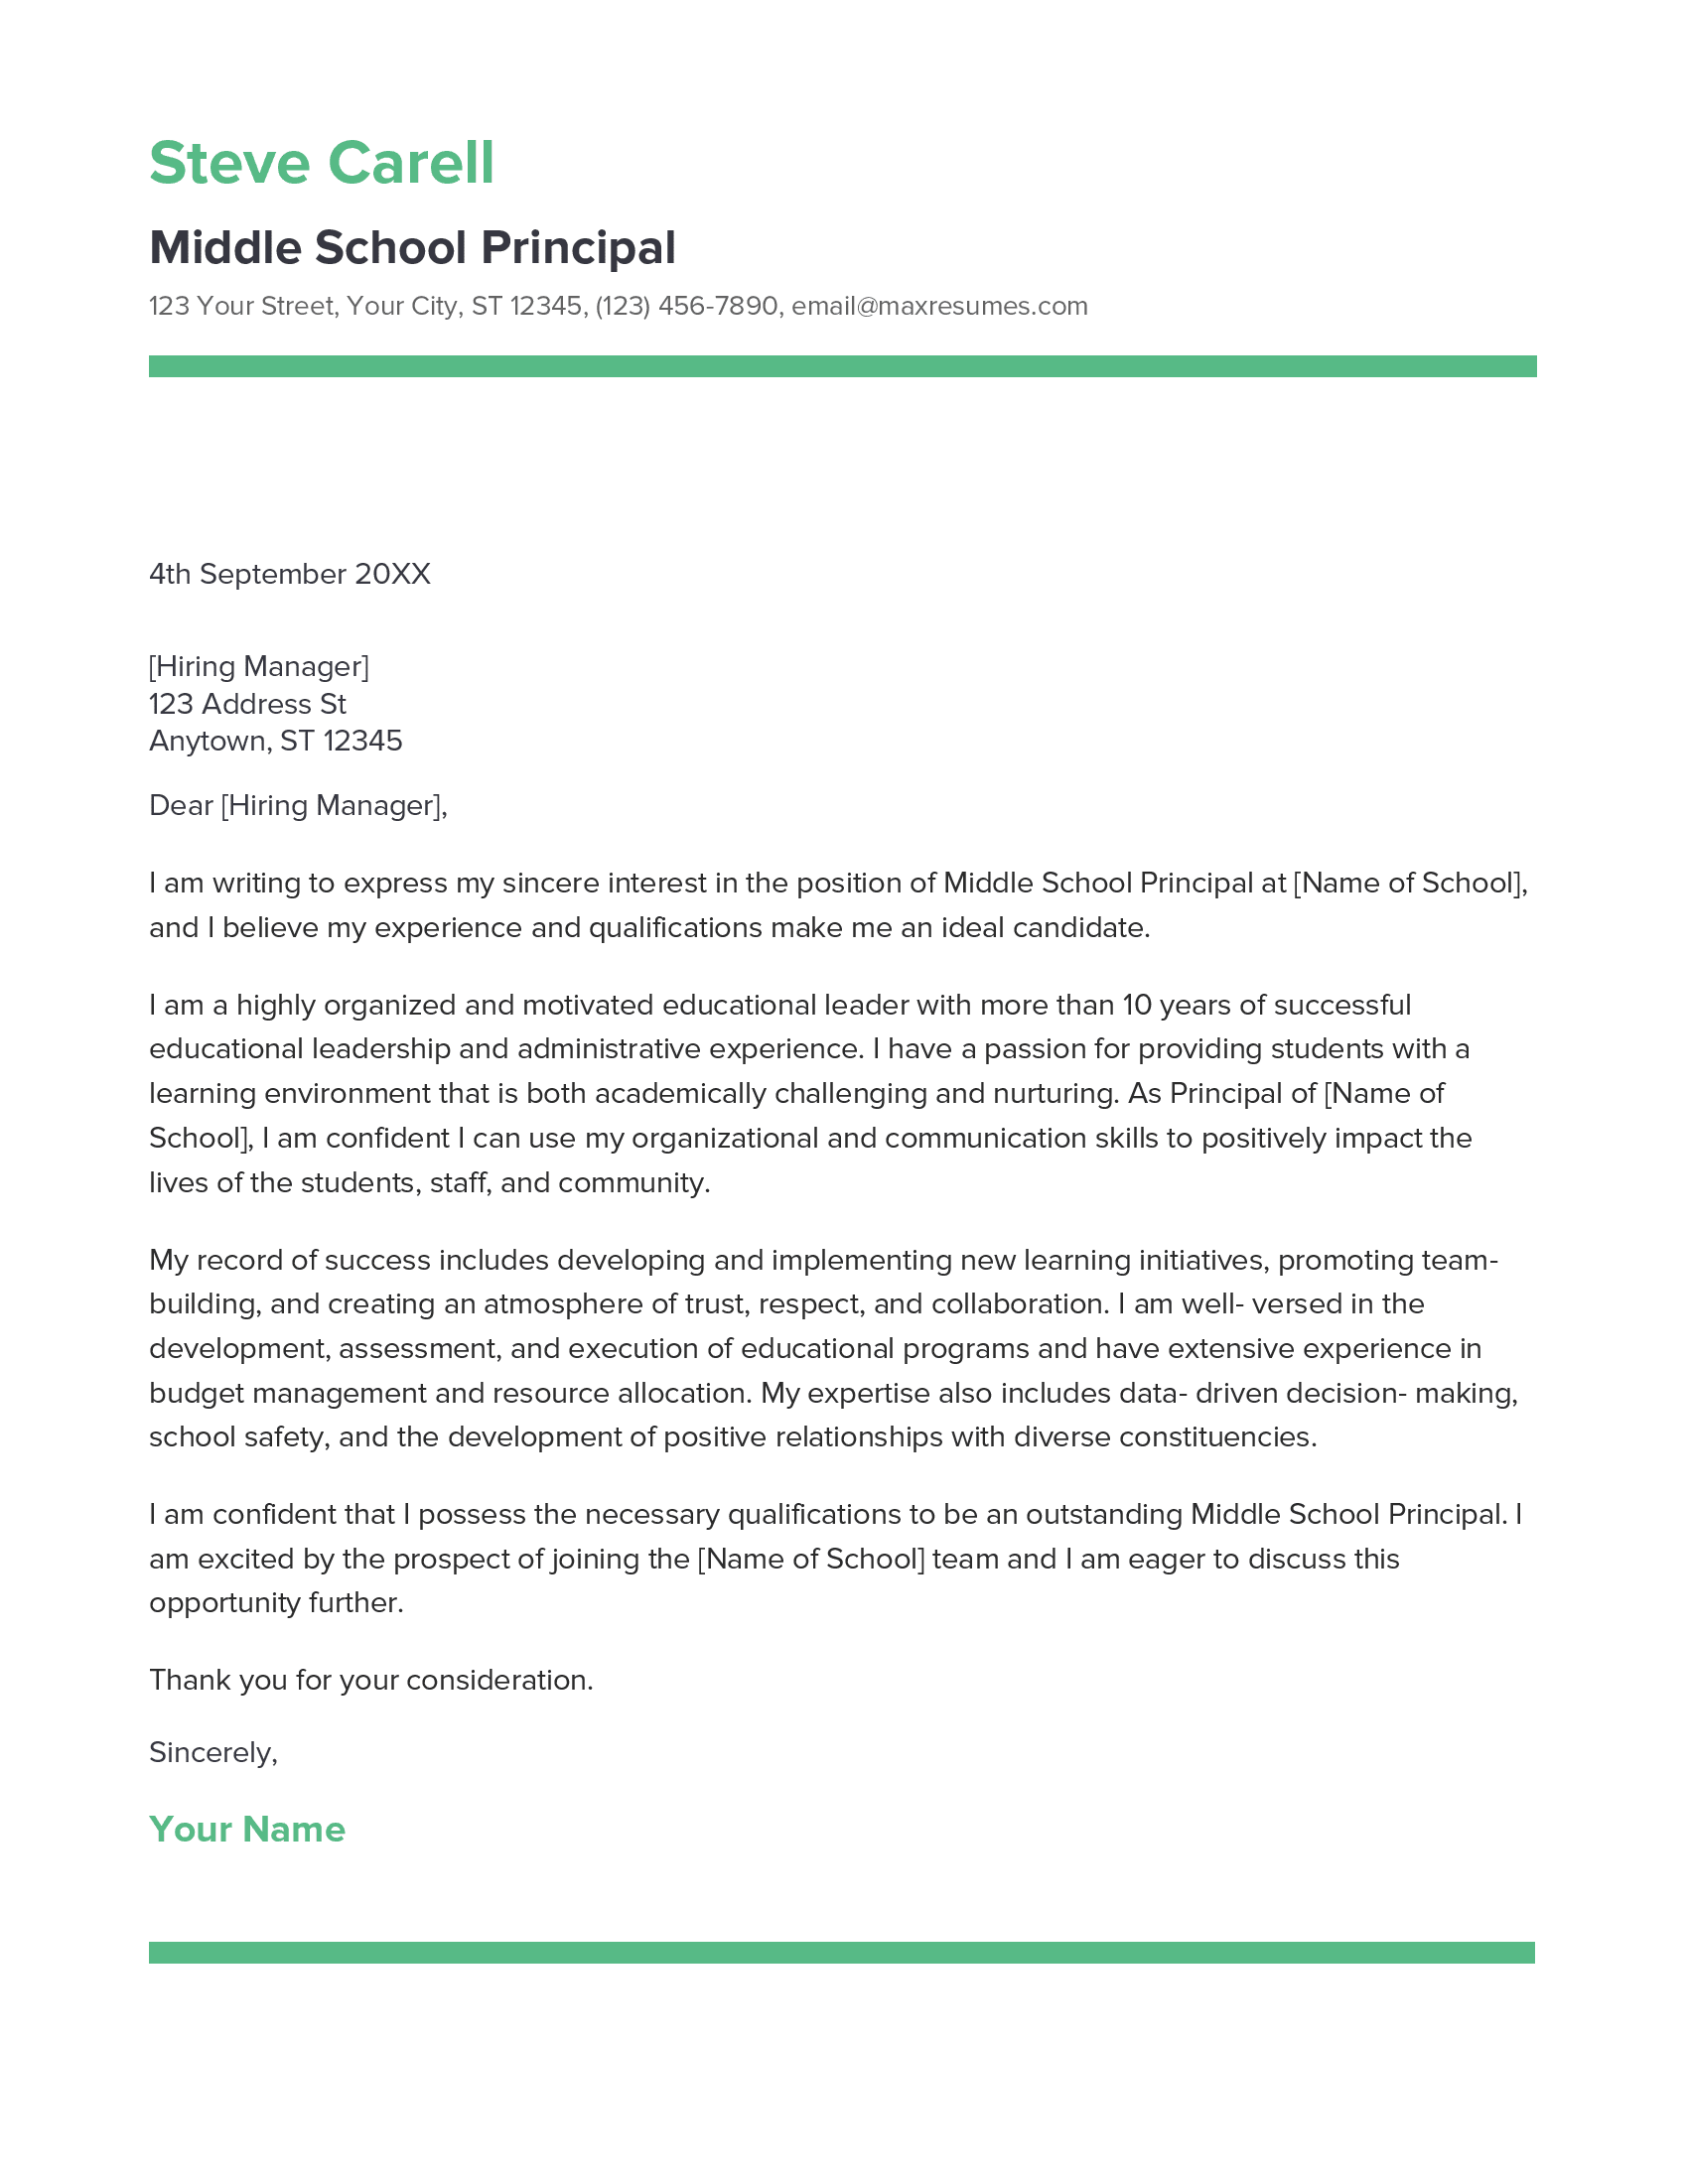 Middle School Principal Cover Letter Example